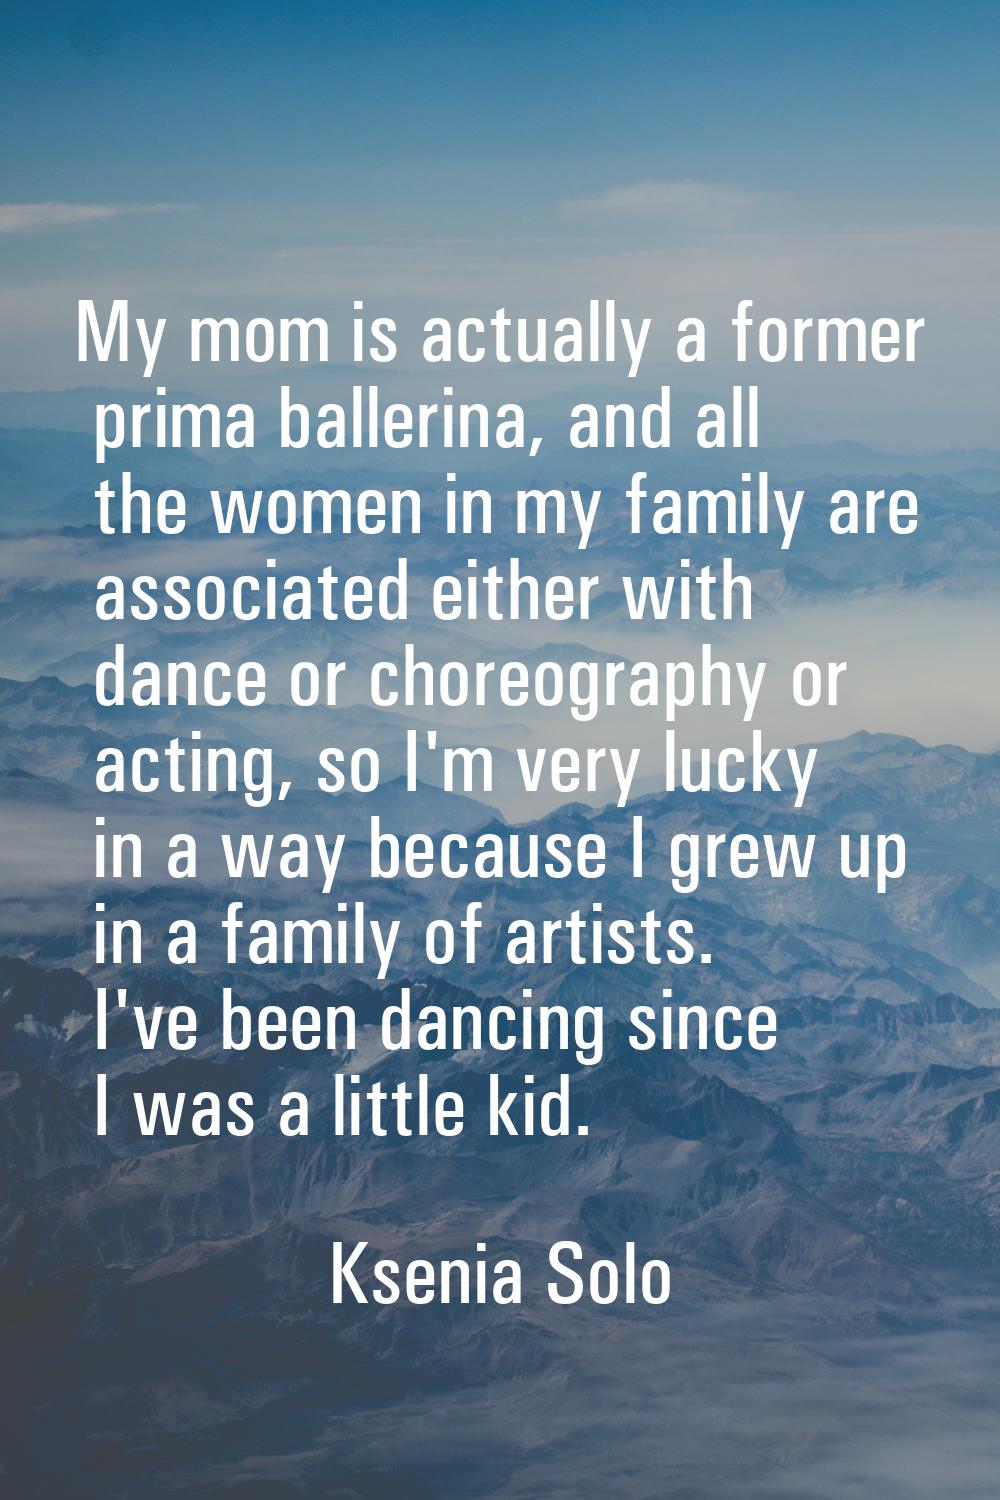 My mom is actually a former prima ballerina, and all the women in my family are associated either w